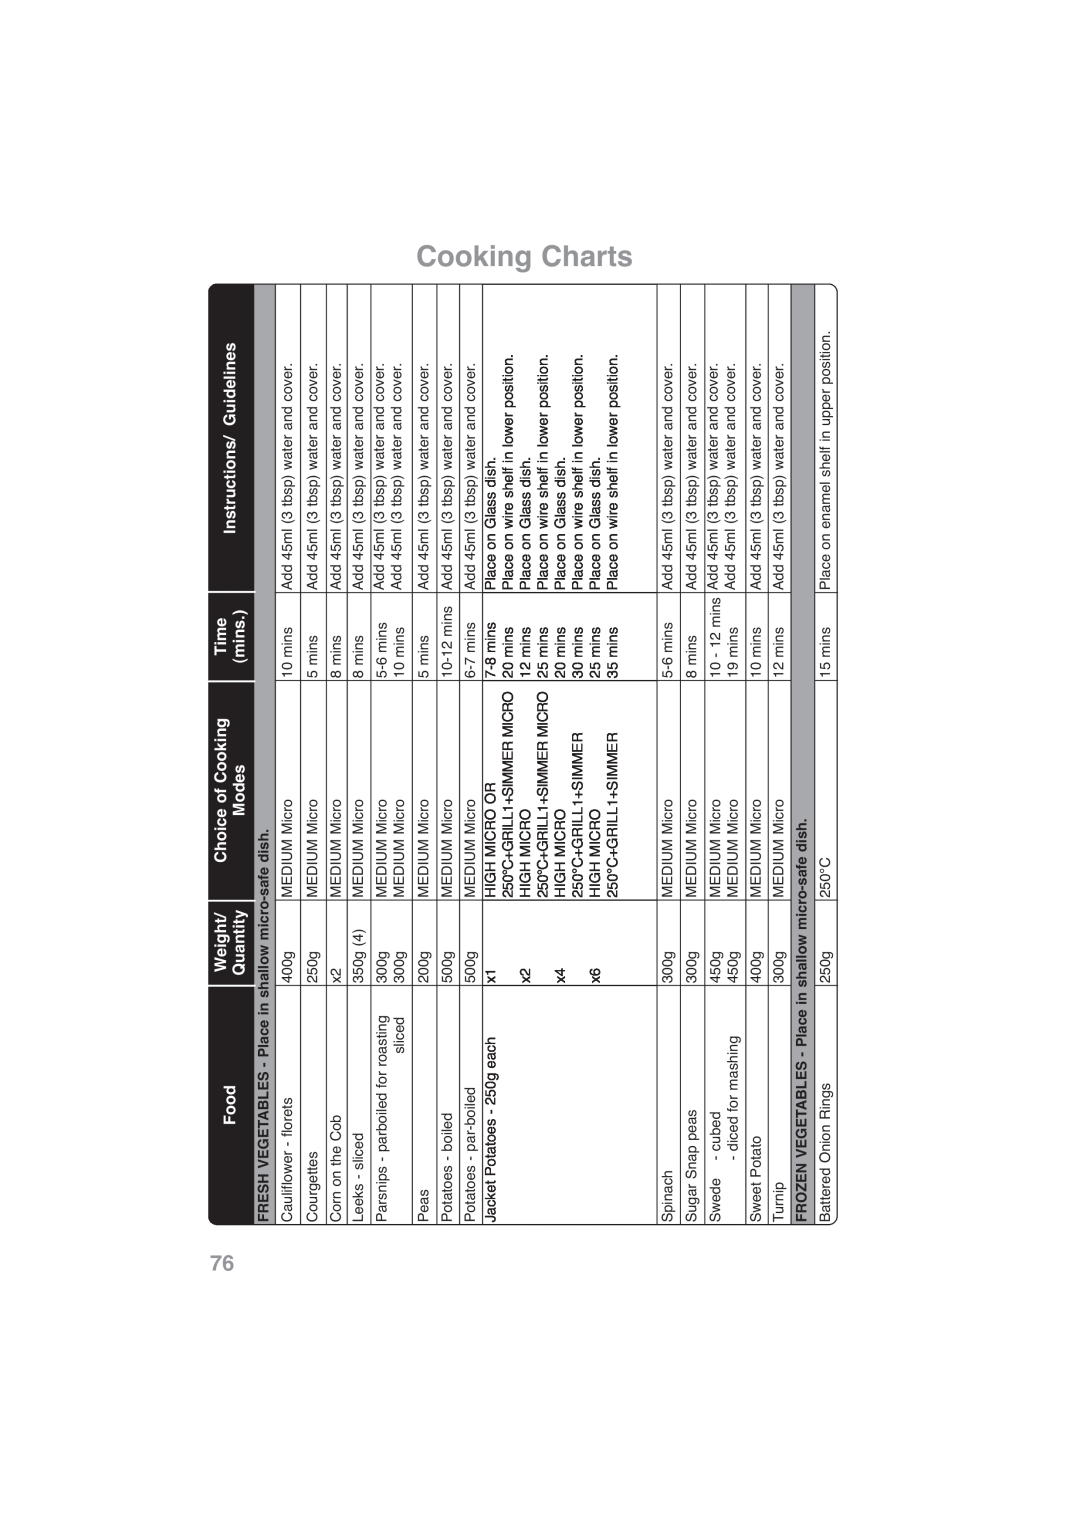 Panasonic NN-CF768M Cooking Charts, Food, Weight, Choice of Cooking, Time, Instructions/ Guidelines, Quantity, Modes, mins 